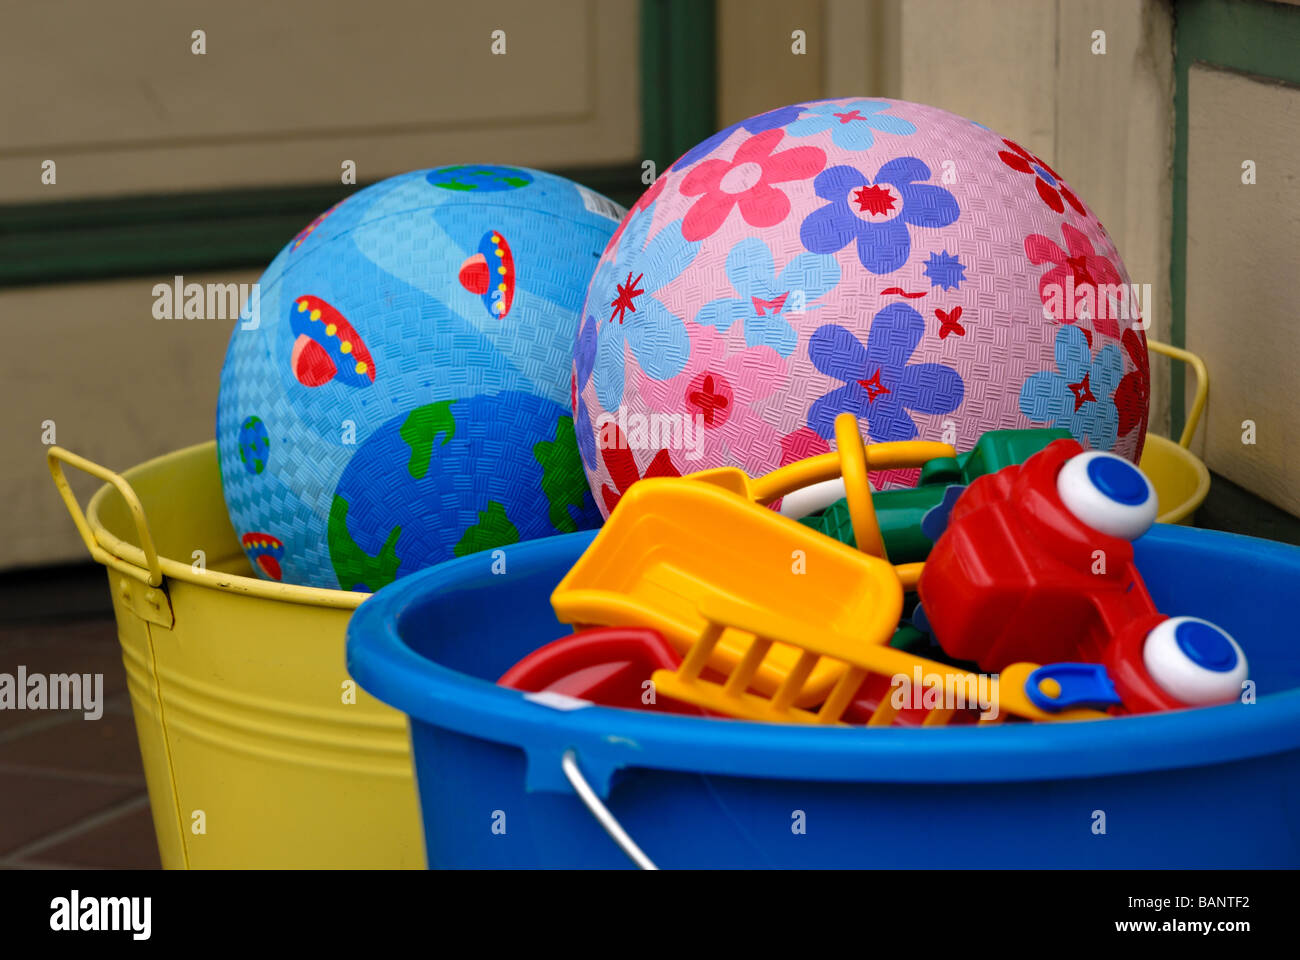 Colorful balls and toys are piled in brightly colored buckets on the sidewalk outside of a toy store. Stock Photo